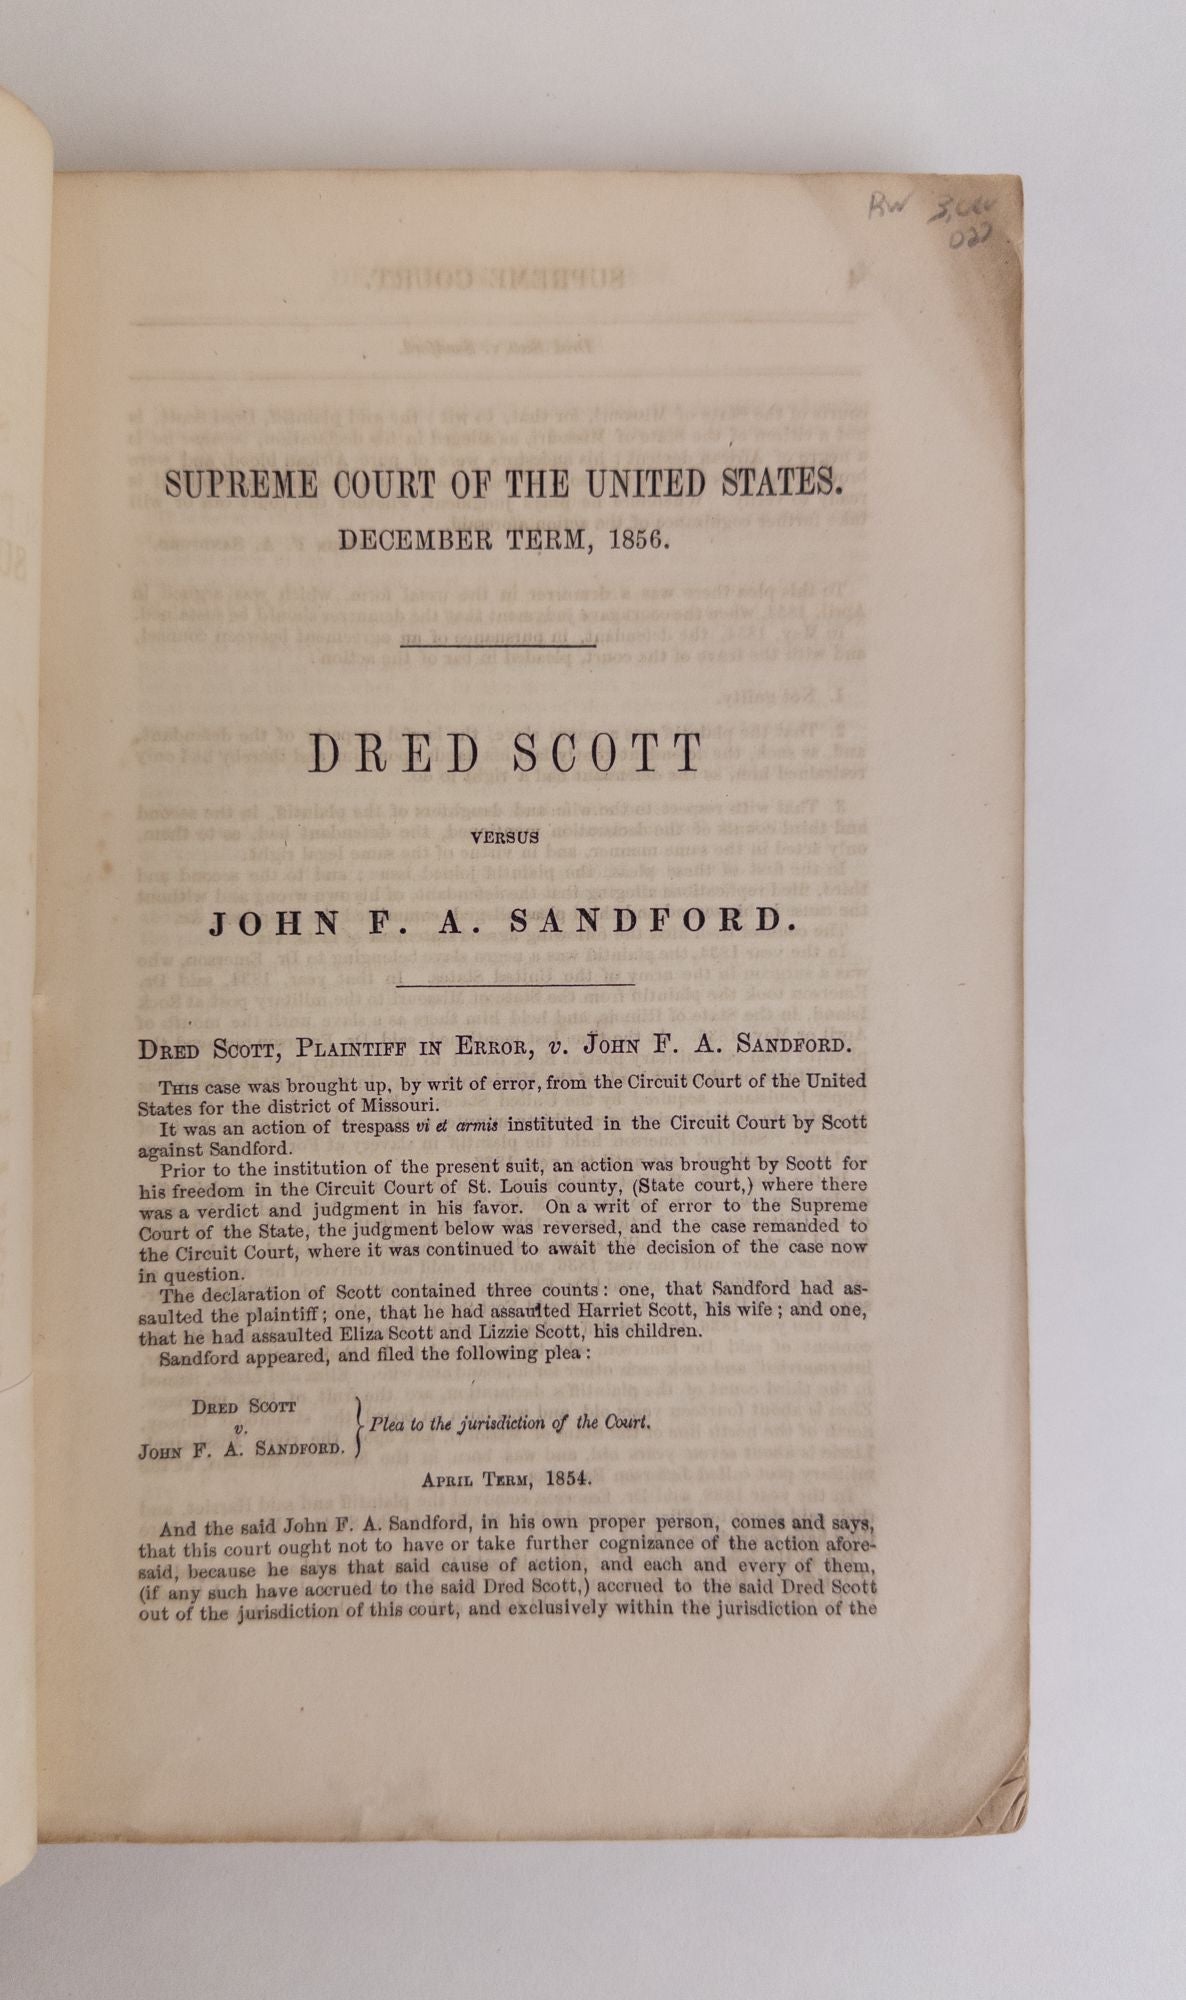 Product Image for REPORT OF THE DECISION OF THE SUPREME COURT OF THE UNITED STATES, AND THE OPINIONS OF THE JUDGES THEREOF, IN THE CASE OF DRED SCOTT VERSUS JOHN F. A. SANDFORD